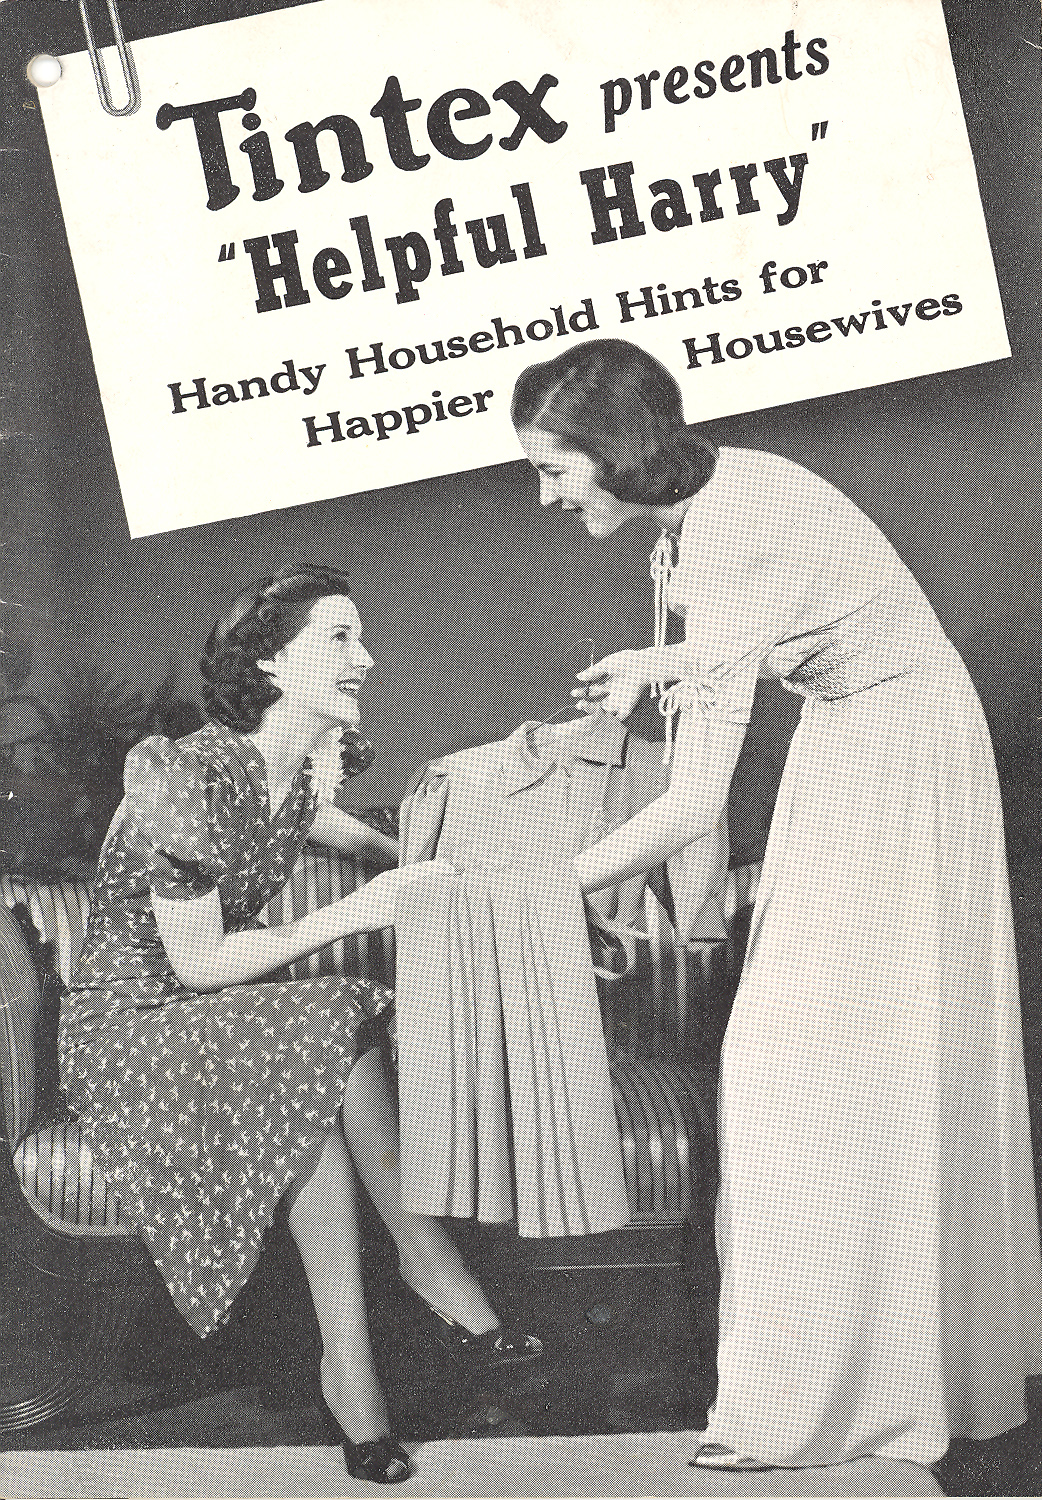 Pamphlet cover. Black and white photo of a woman displaying a dress on a hanger to another woman seated on a couch.